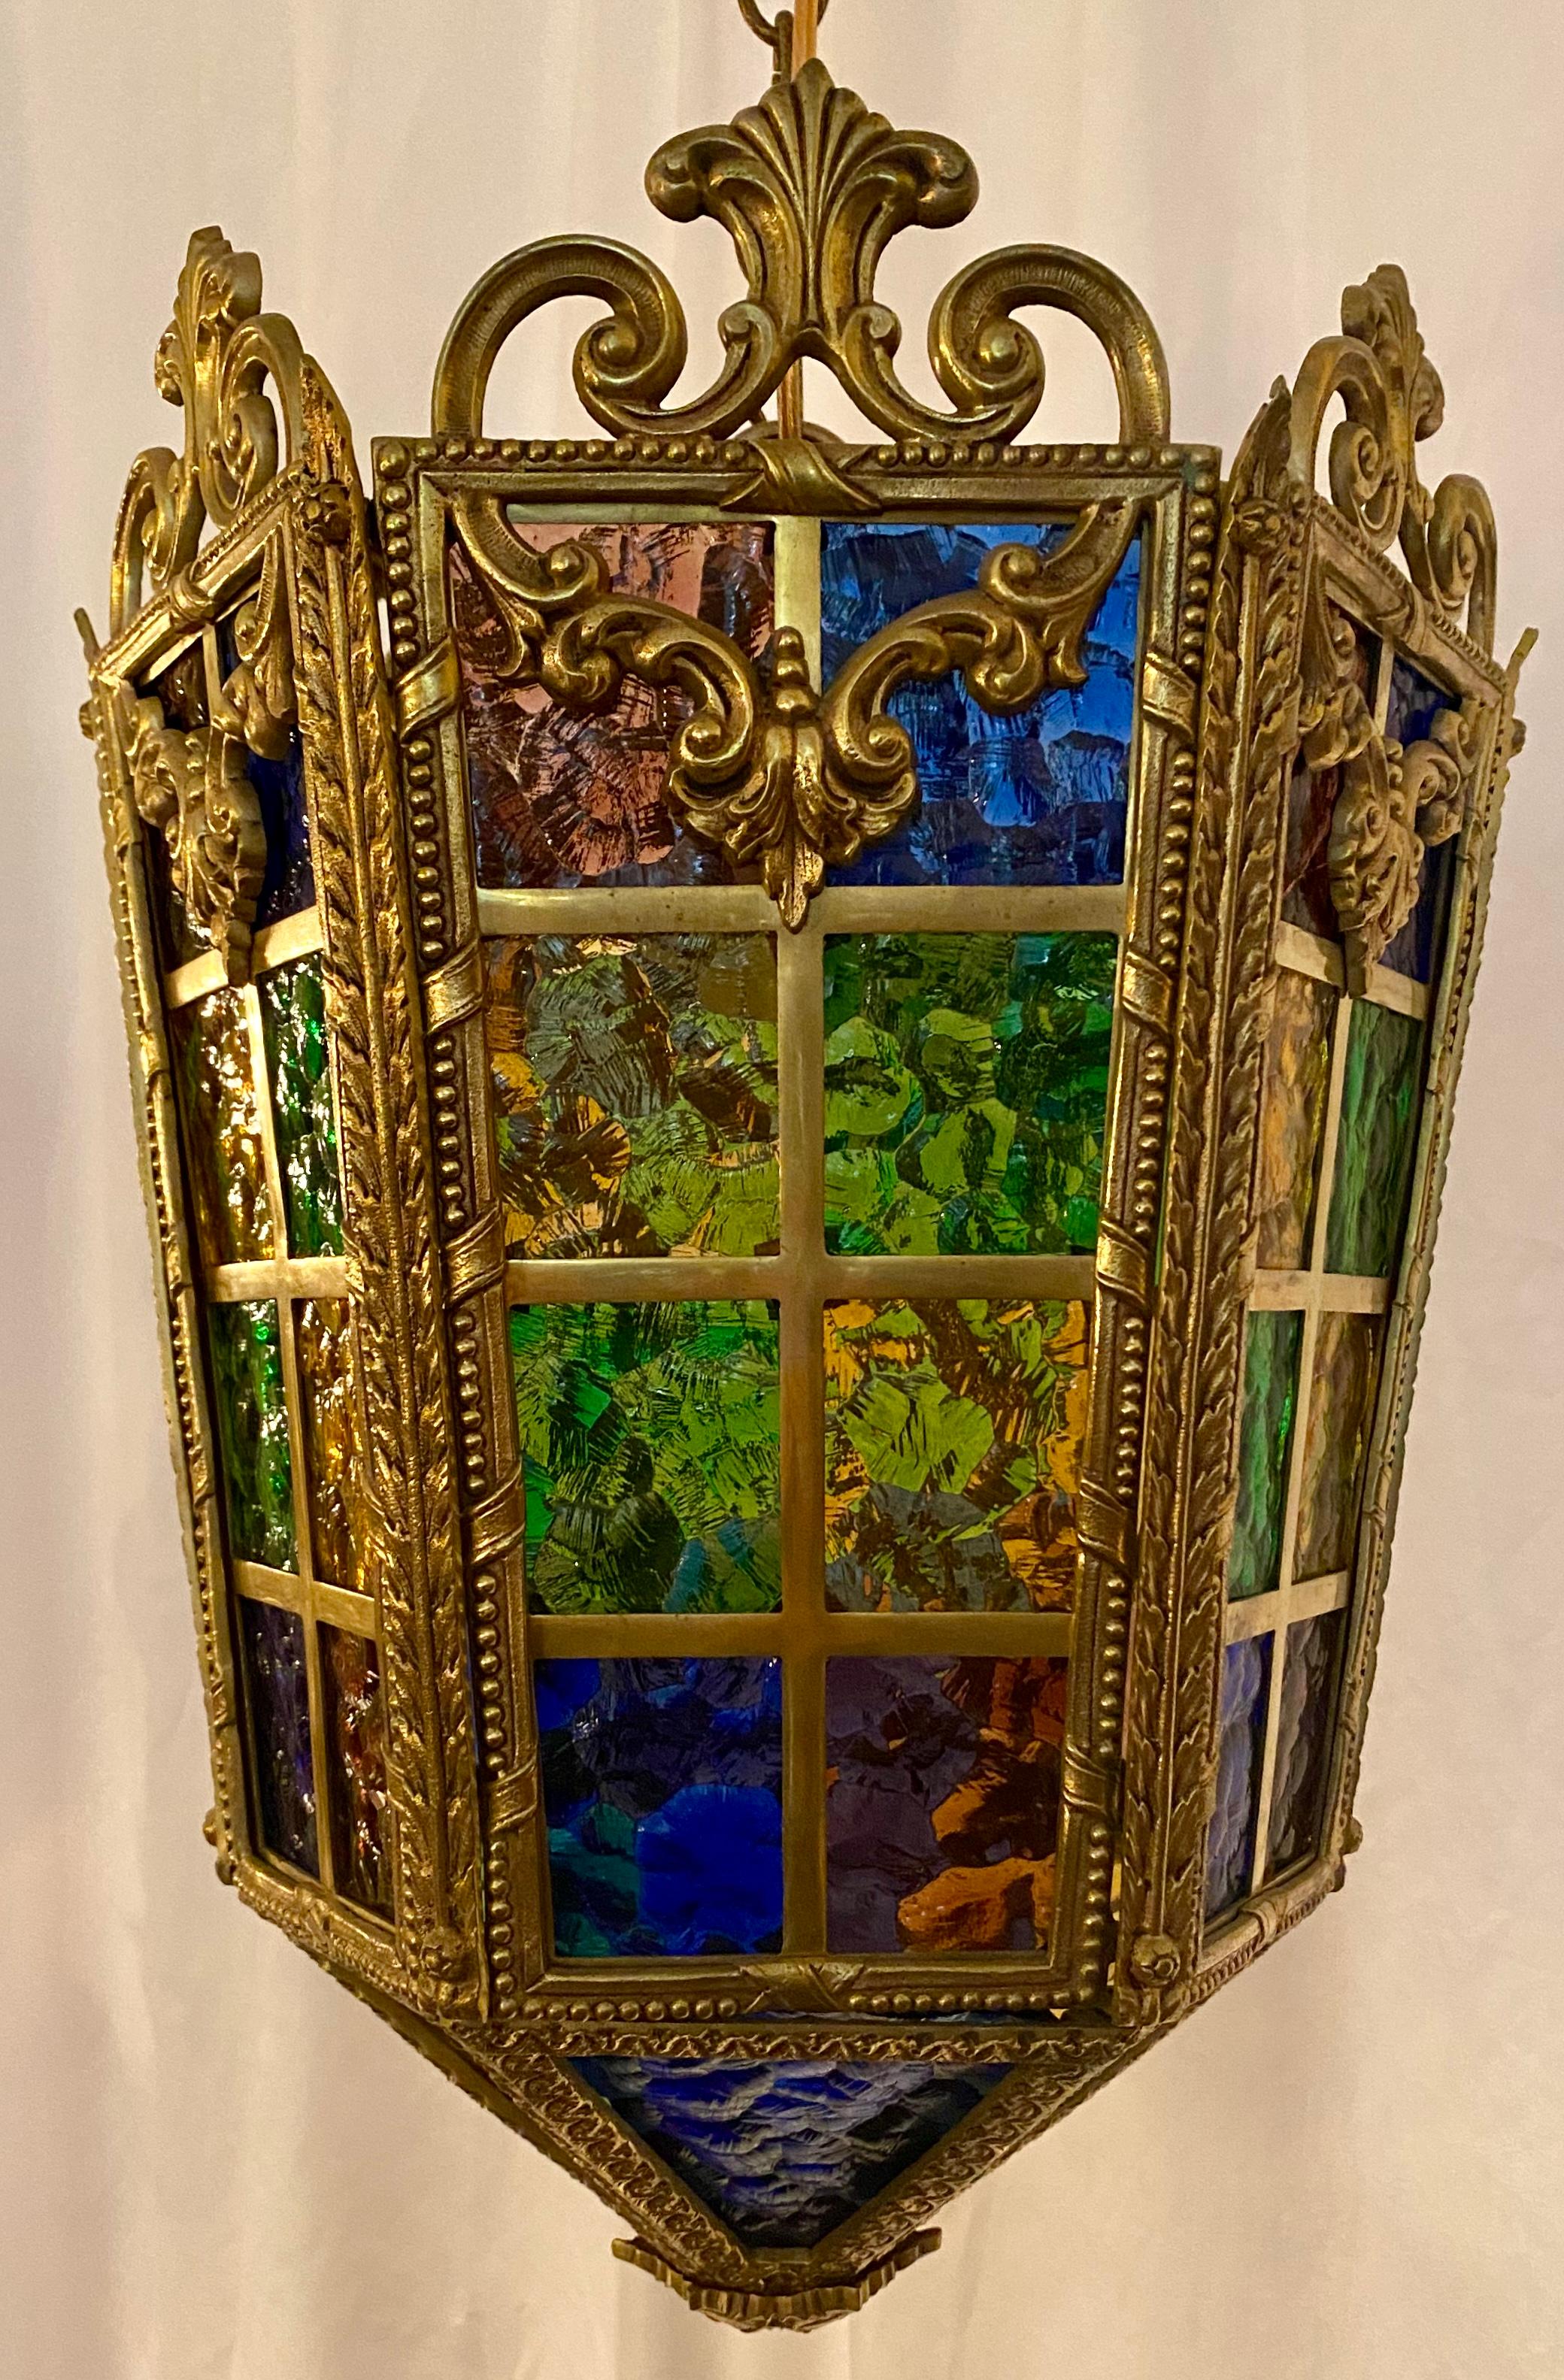 Antique early 20th century continental stained glass lantern, circa 1910.
LAN006.